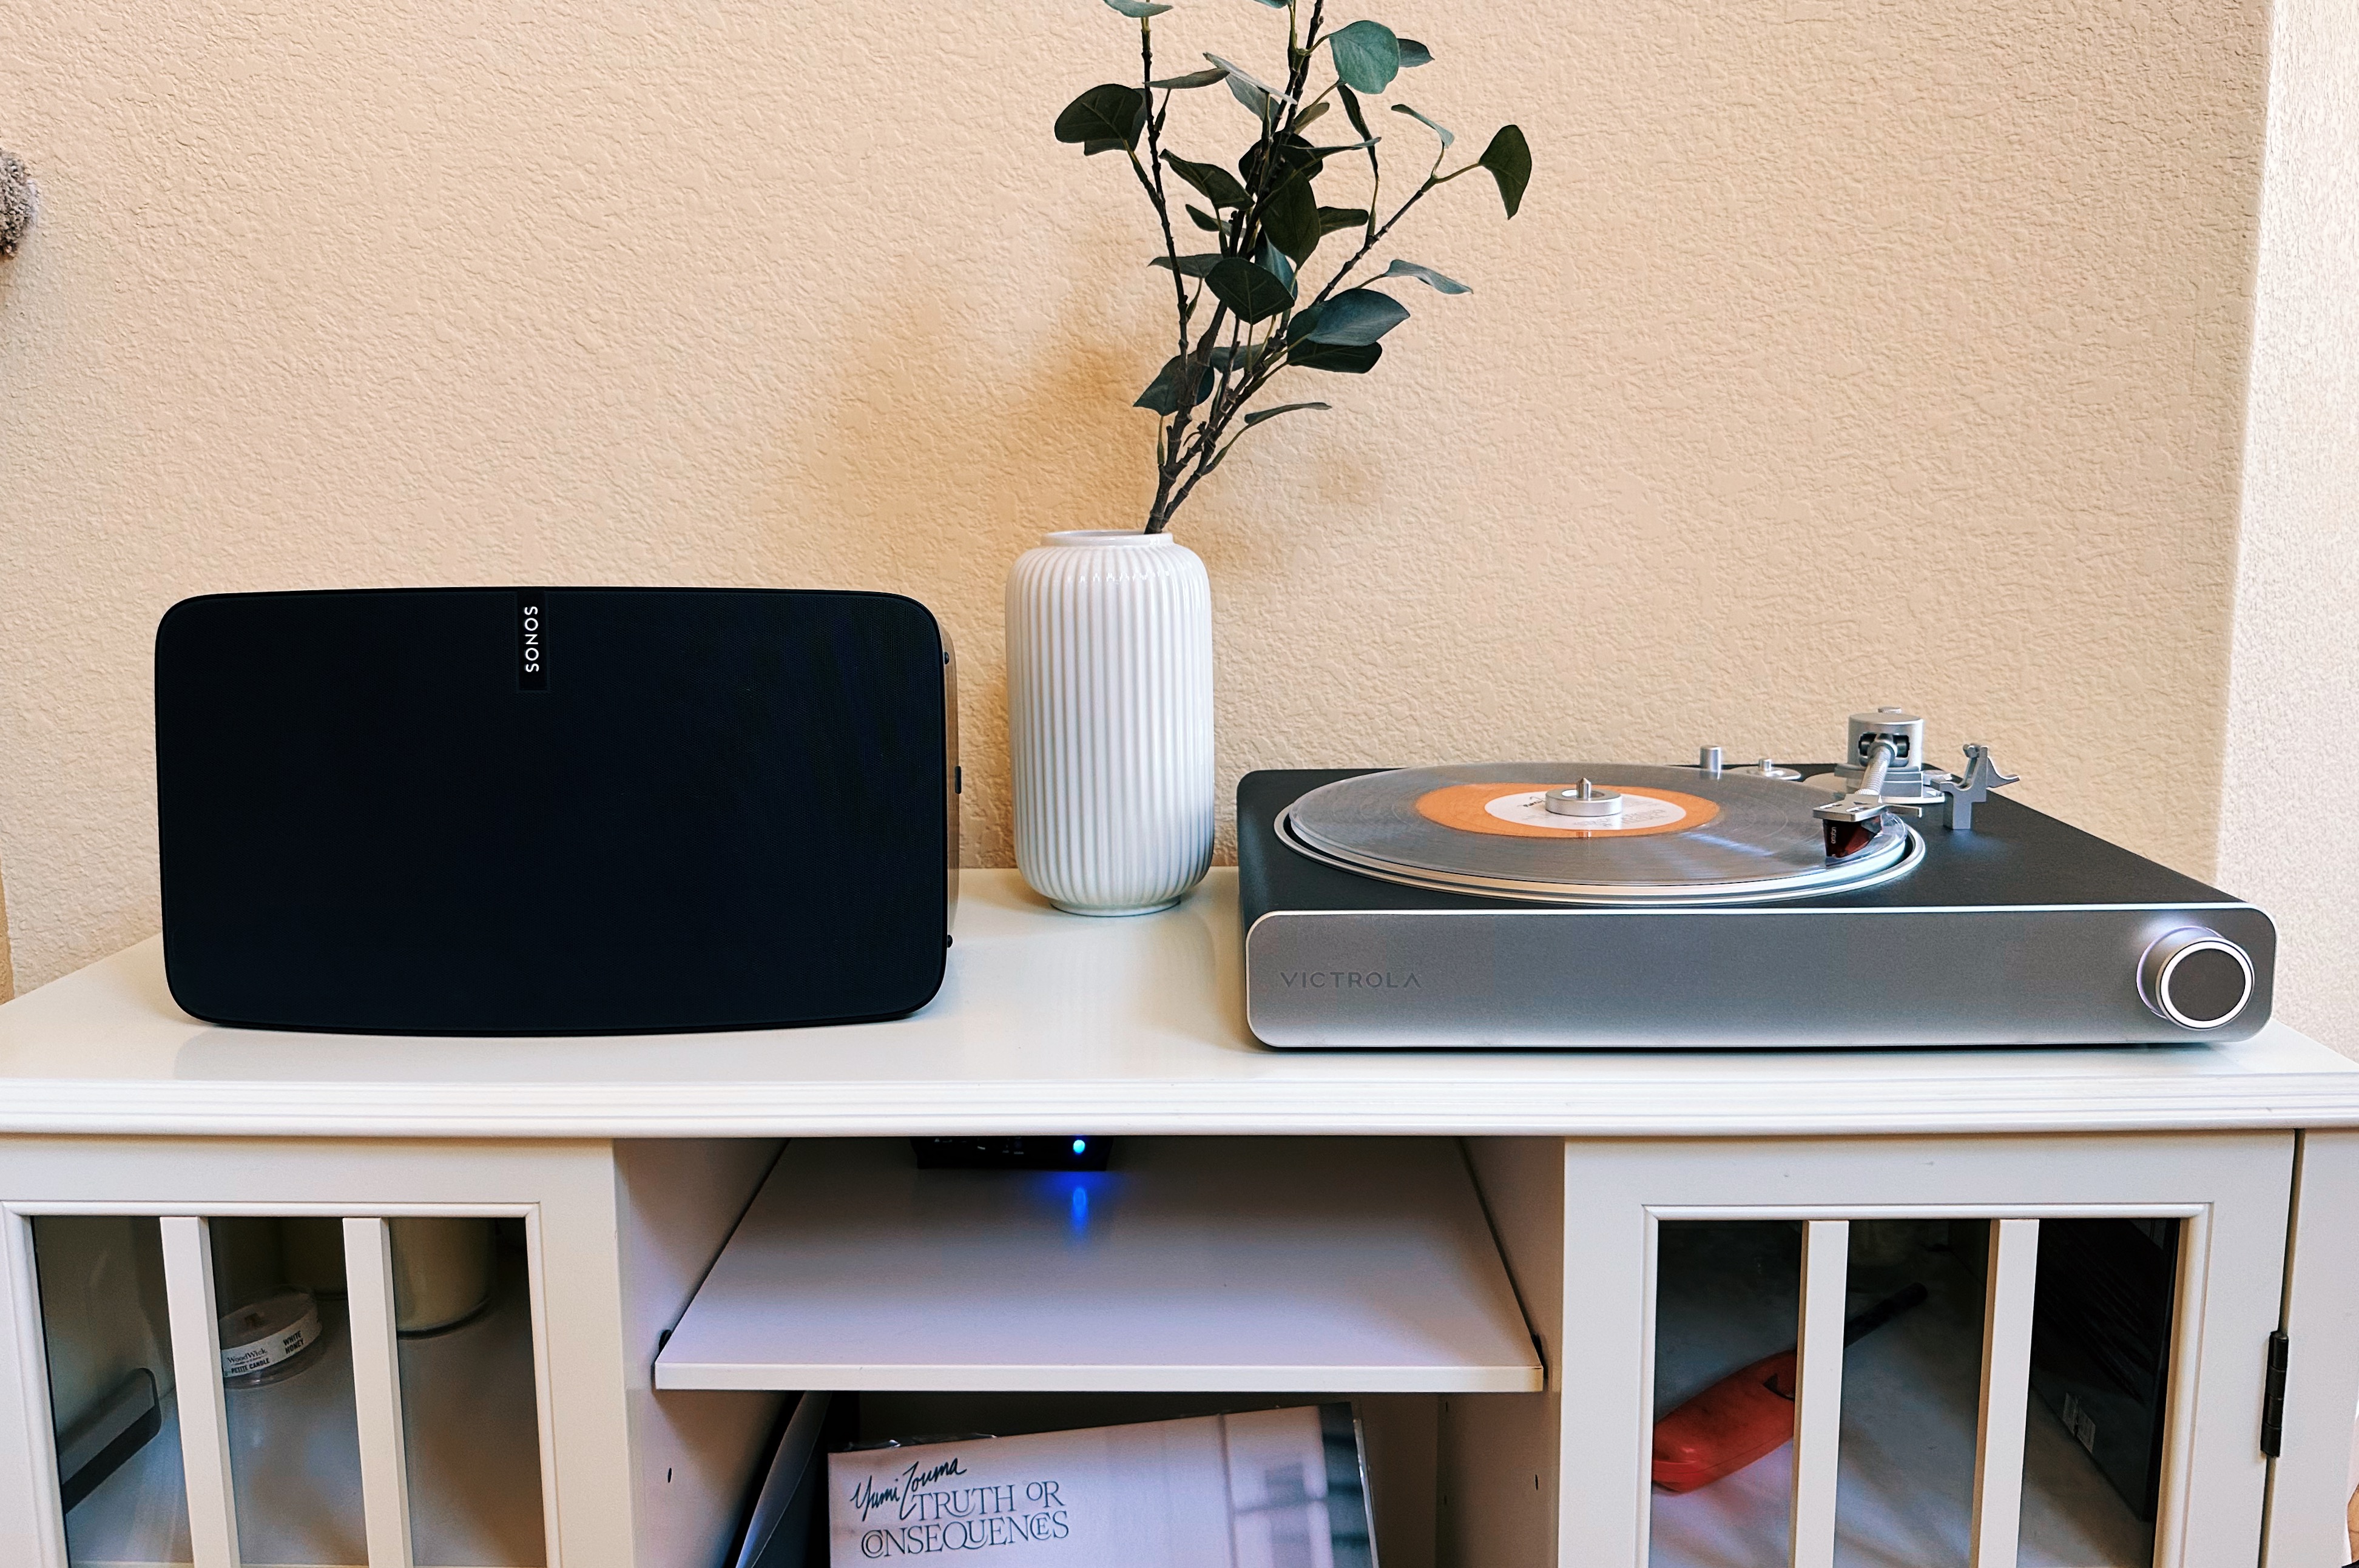 Victrola Stream Is a Wireless Turntable Made for Sonos